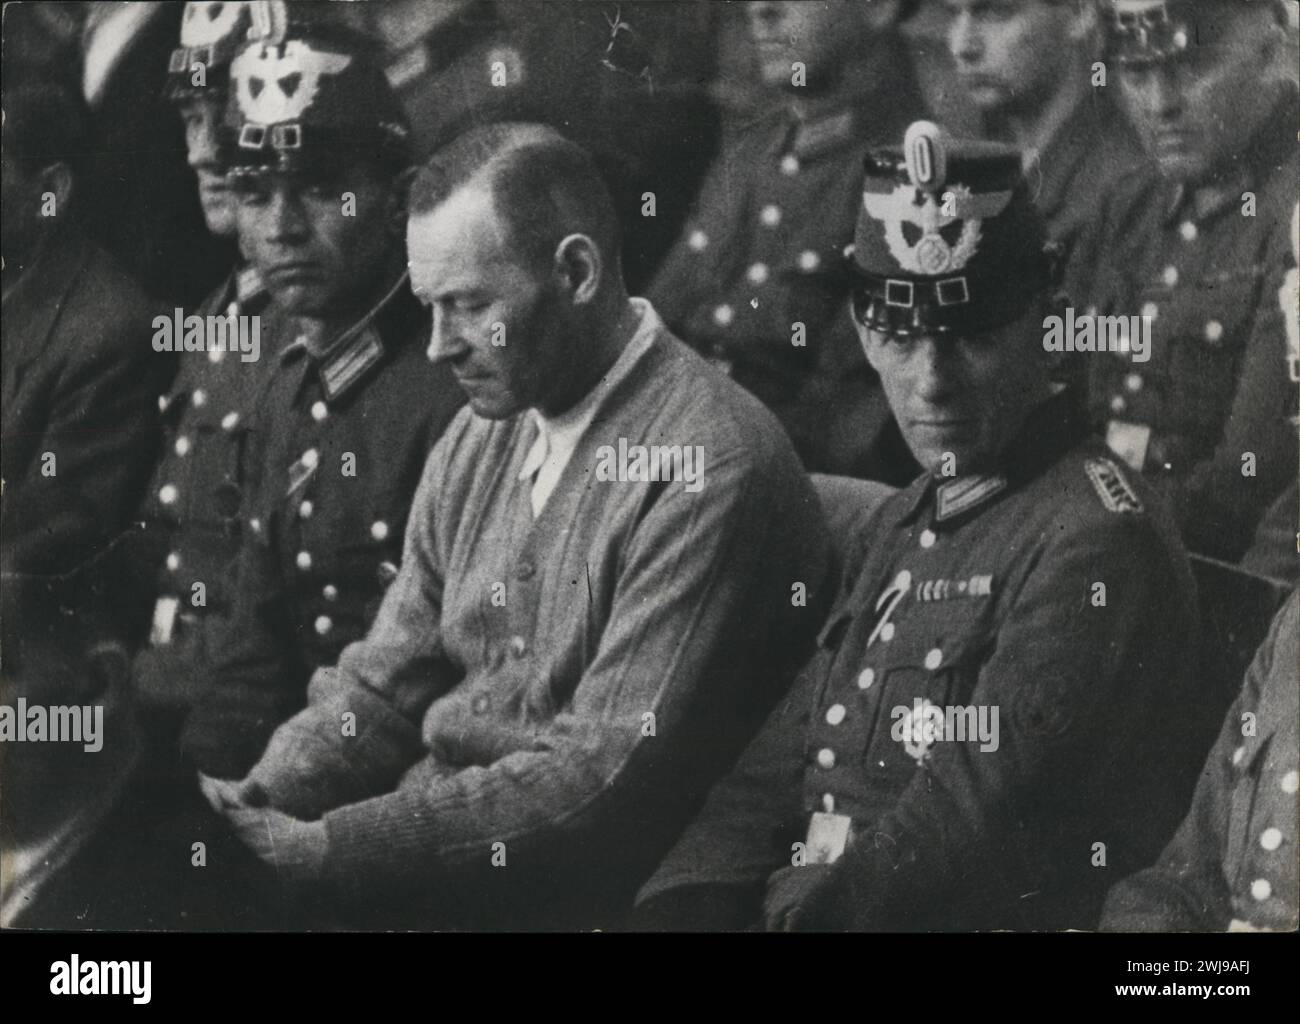 August 7, 1944, Berlin, Germany: Former German COLONEL-GENERAL ERICH KURT RICHARD HOEPNER (born September 14,1886), 57, in the People's Court (Volksgerichtshof), in the Great Hall of the Berlin Chamber Court on Elßholzstrasse, on the accused bench, dressed in a cardigan. Hoepner is on trial for being named a member of the failed Hitler 20 July Cup attempt. Hoepner was humiliated by being made to wear ill-fitting clothes, and not being allowed to have his false teeth. After the coup failed Hoeppner had been arrested and tortured by the Gestapo. Refused an opportunity to commit suicide and deman Stock Photo